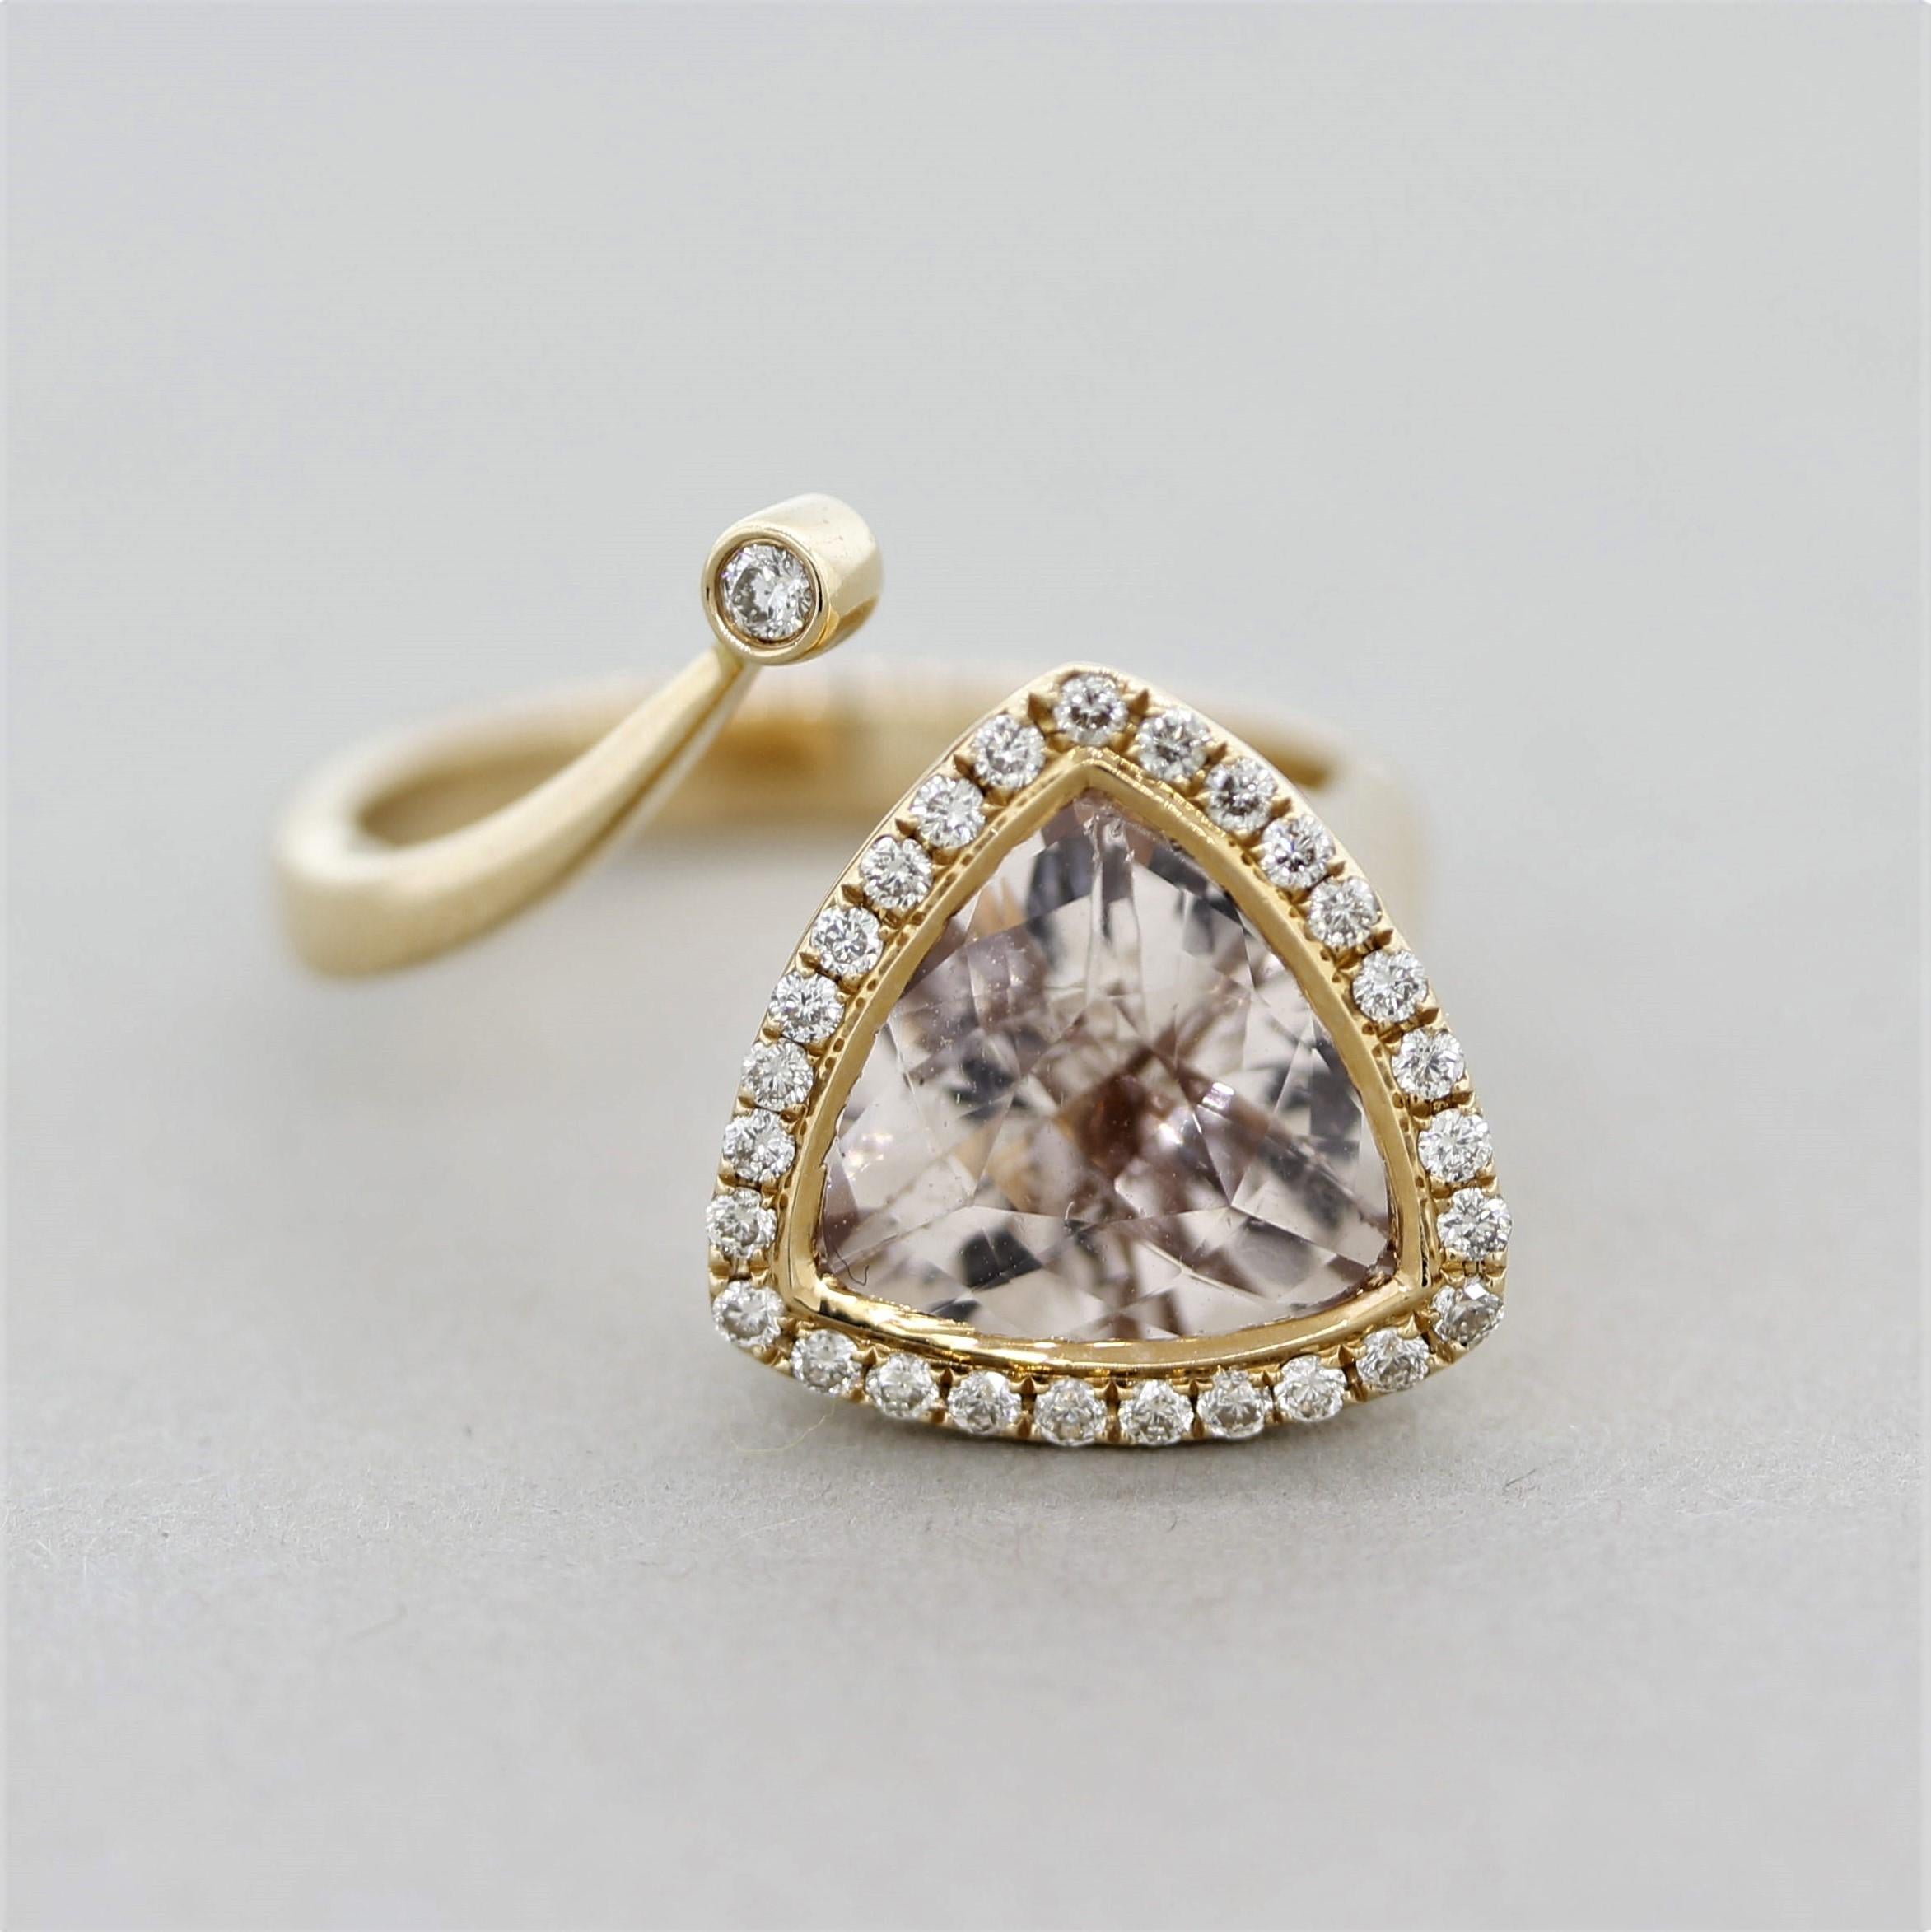 An abstract and unique ring featuring a 3.13 carat trillion-cut morganite. It is bezel set with a diamond halo and accented by a larger diamond set on the opposite end of the ring. Together the round brilliant-cut diamonds weigh 0.27 carats and add